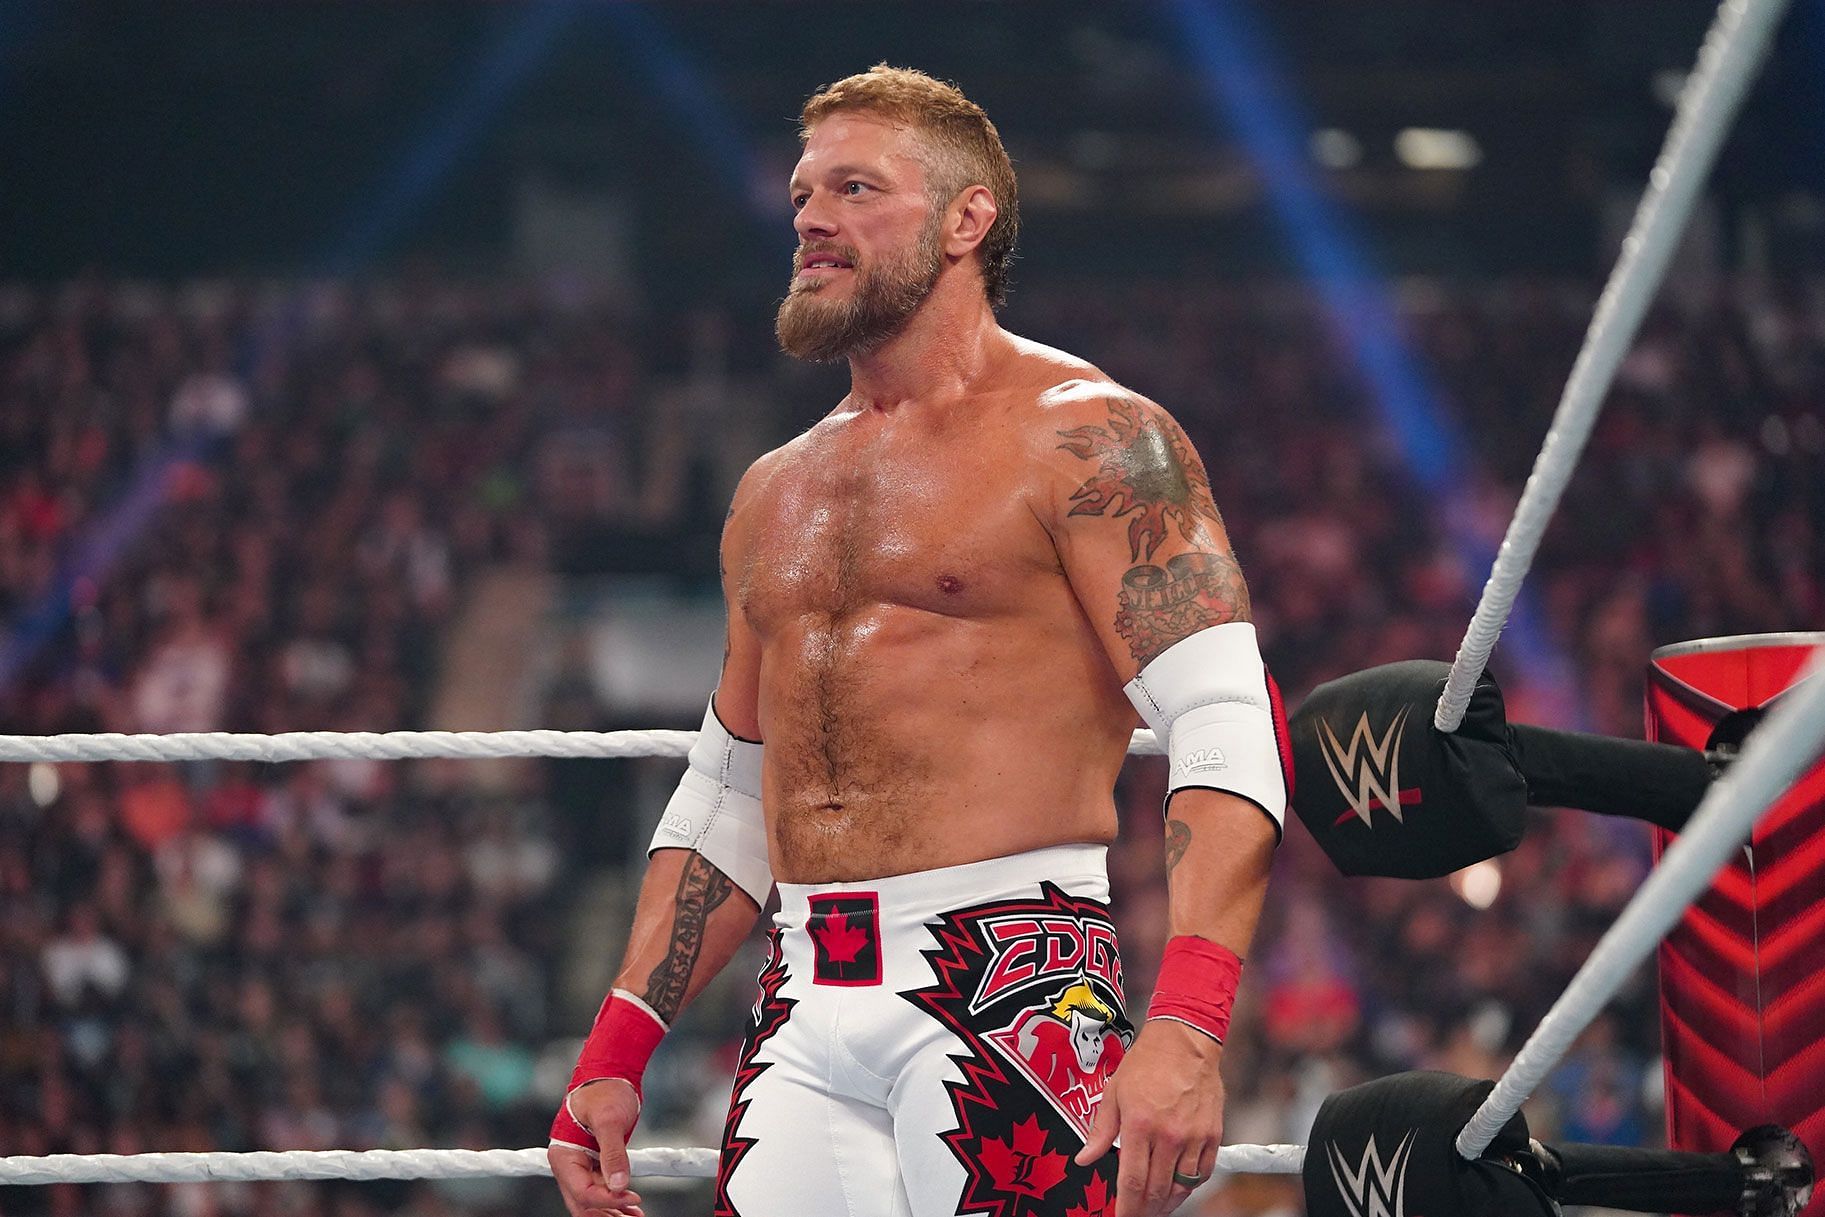 Edge could make another memorable return at the WWE Royal Rumble.